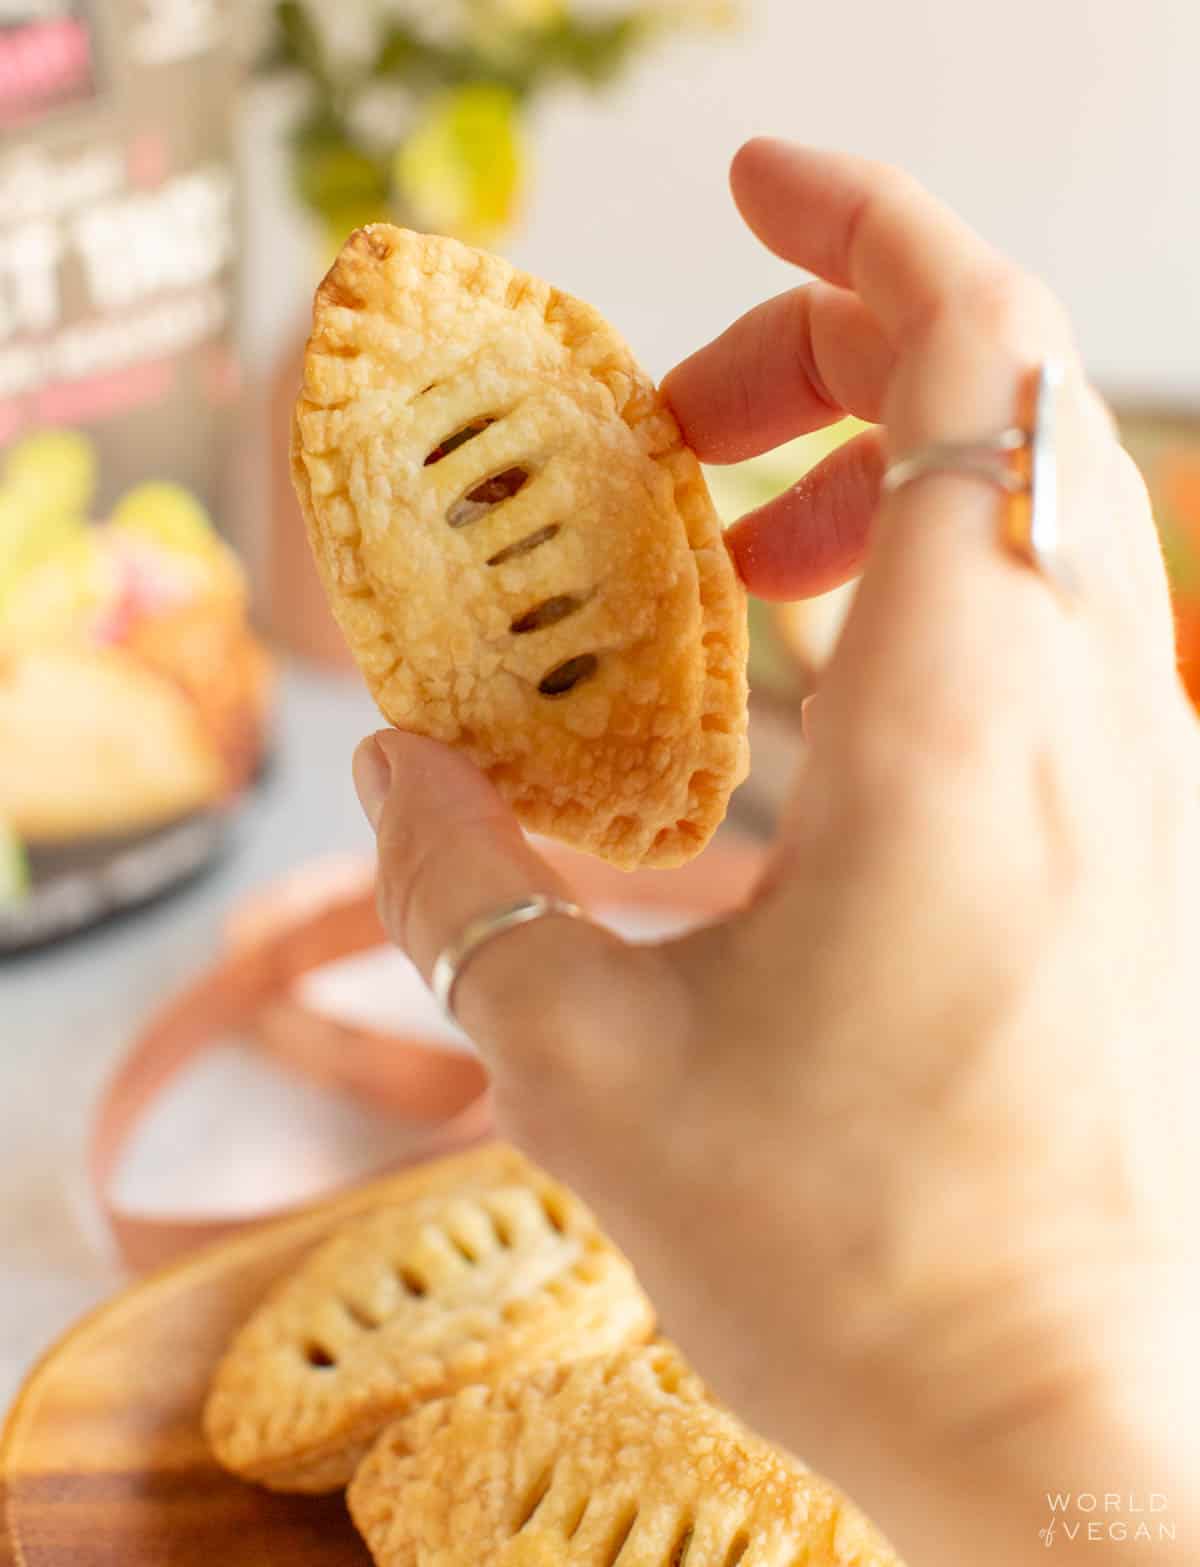 Holding up a savory baked puff pastry shaped like a football. 